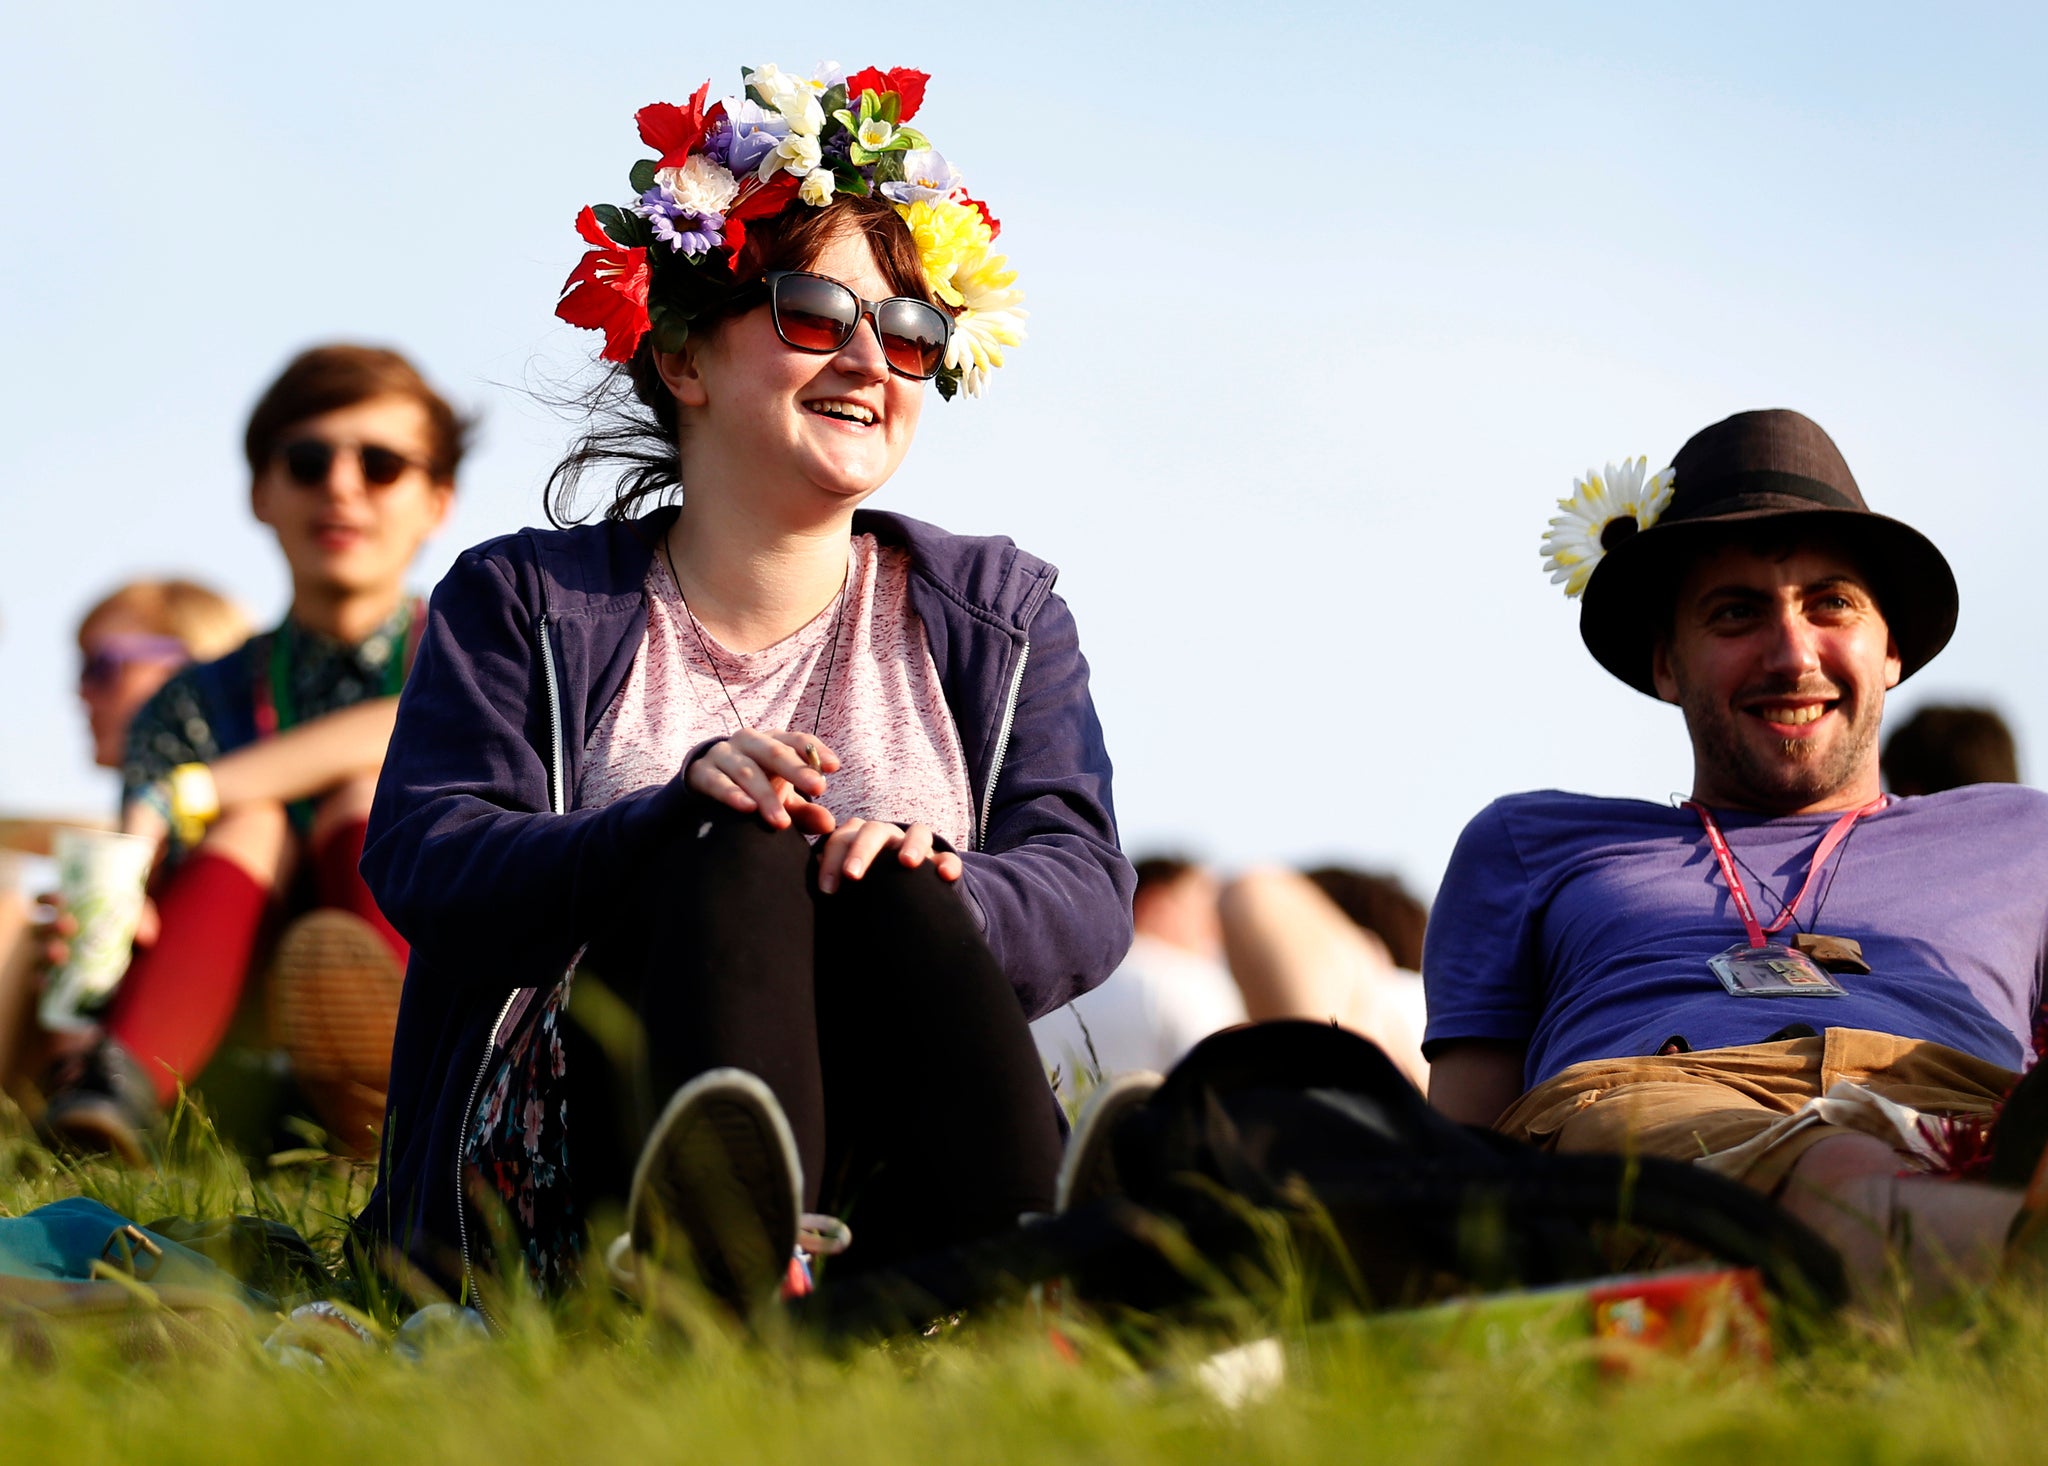 Festivalgoers relax in the sunshine during last year's Glastonbury